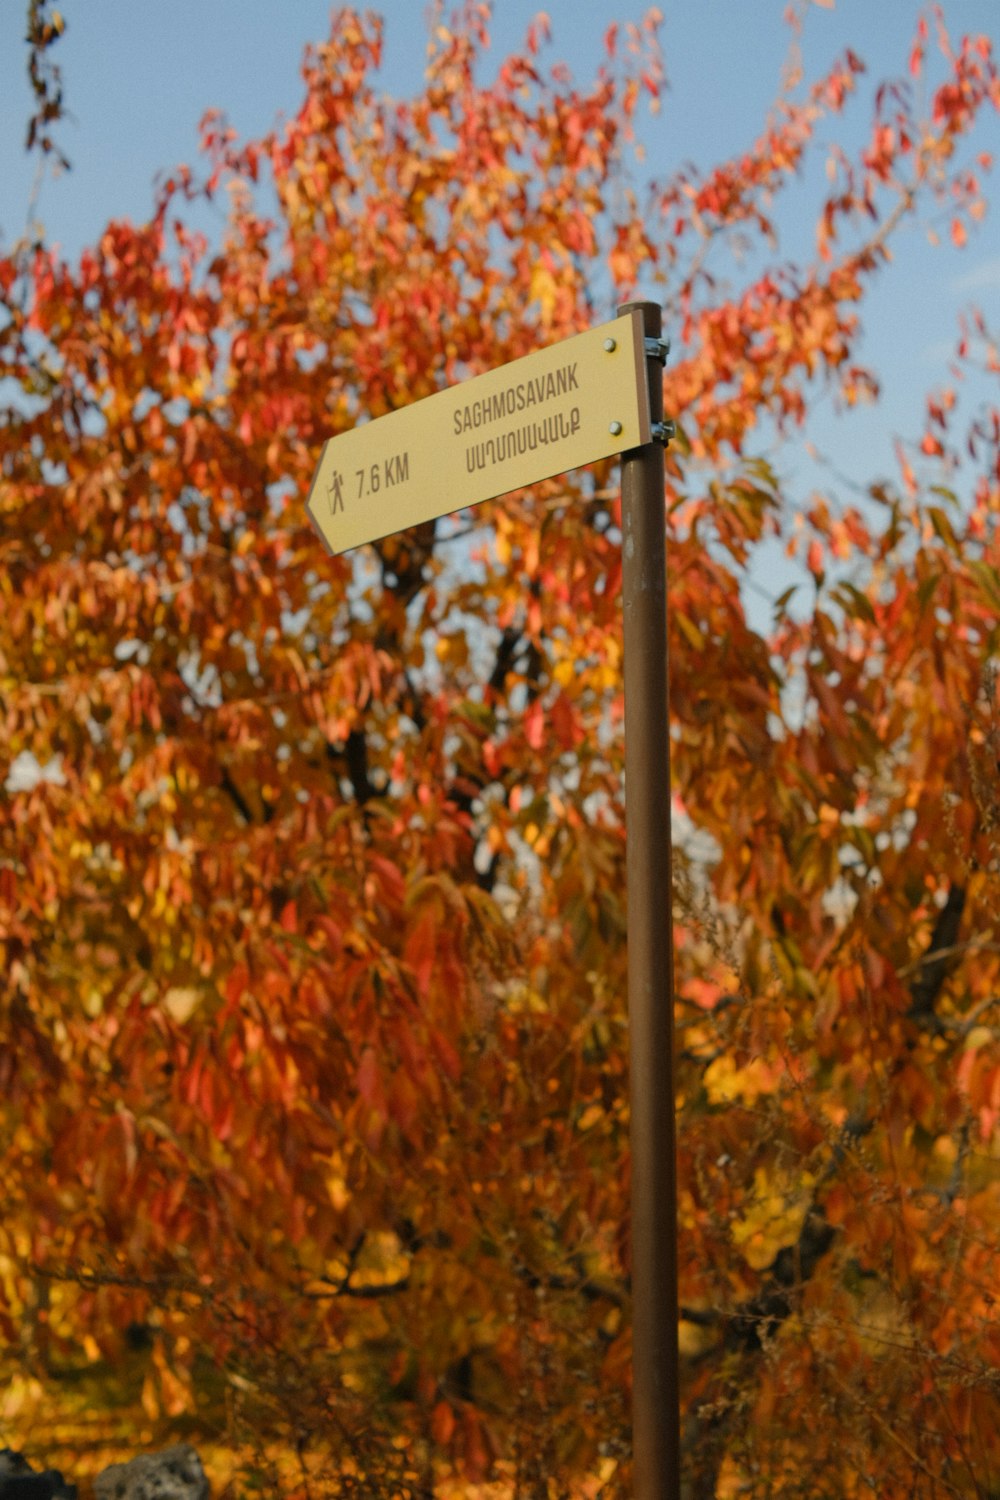 a street sign in front of a tree with orange leaves